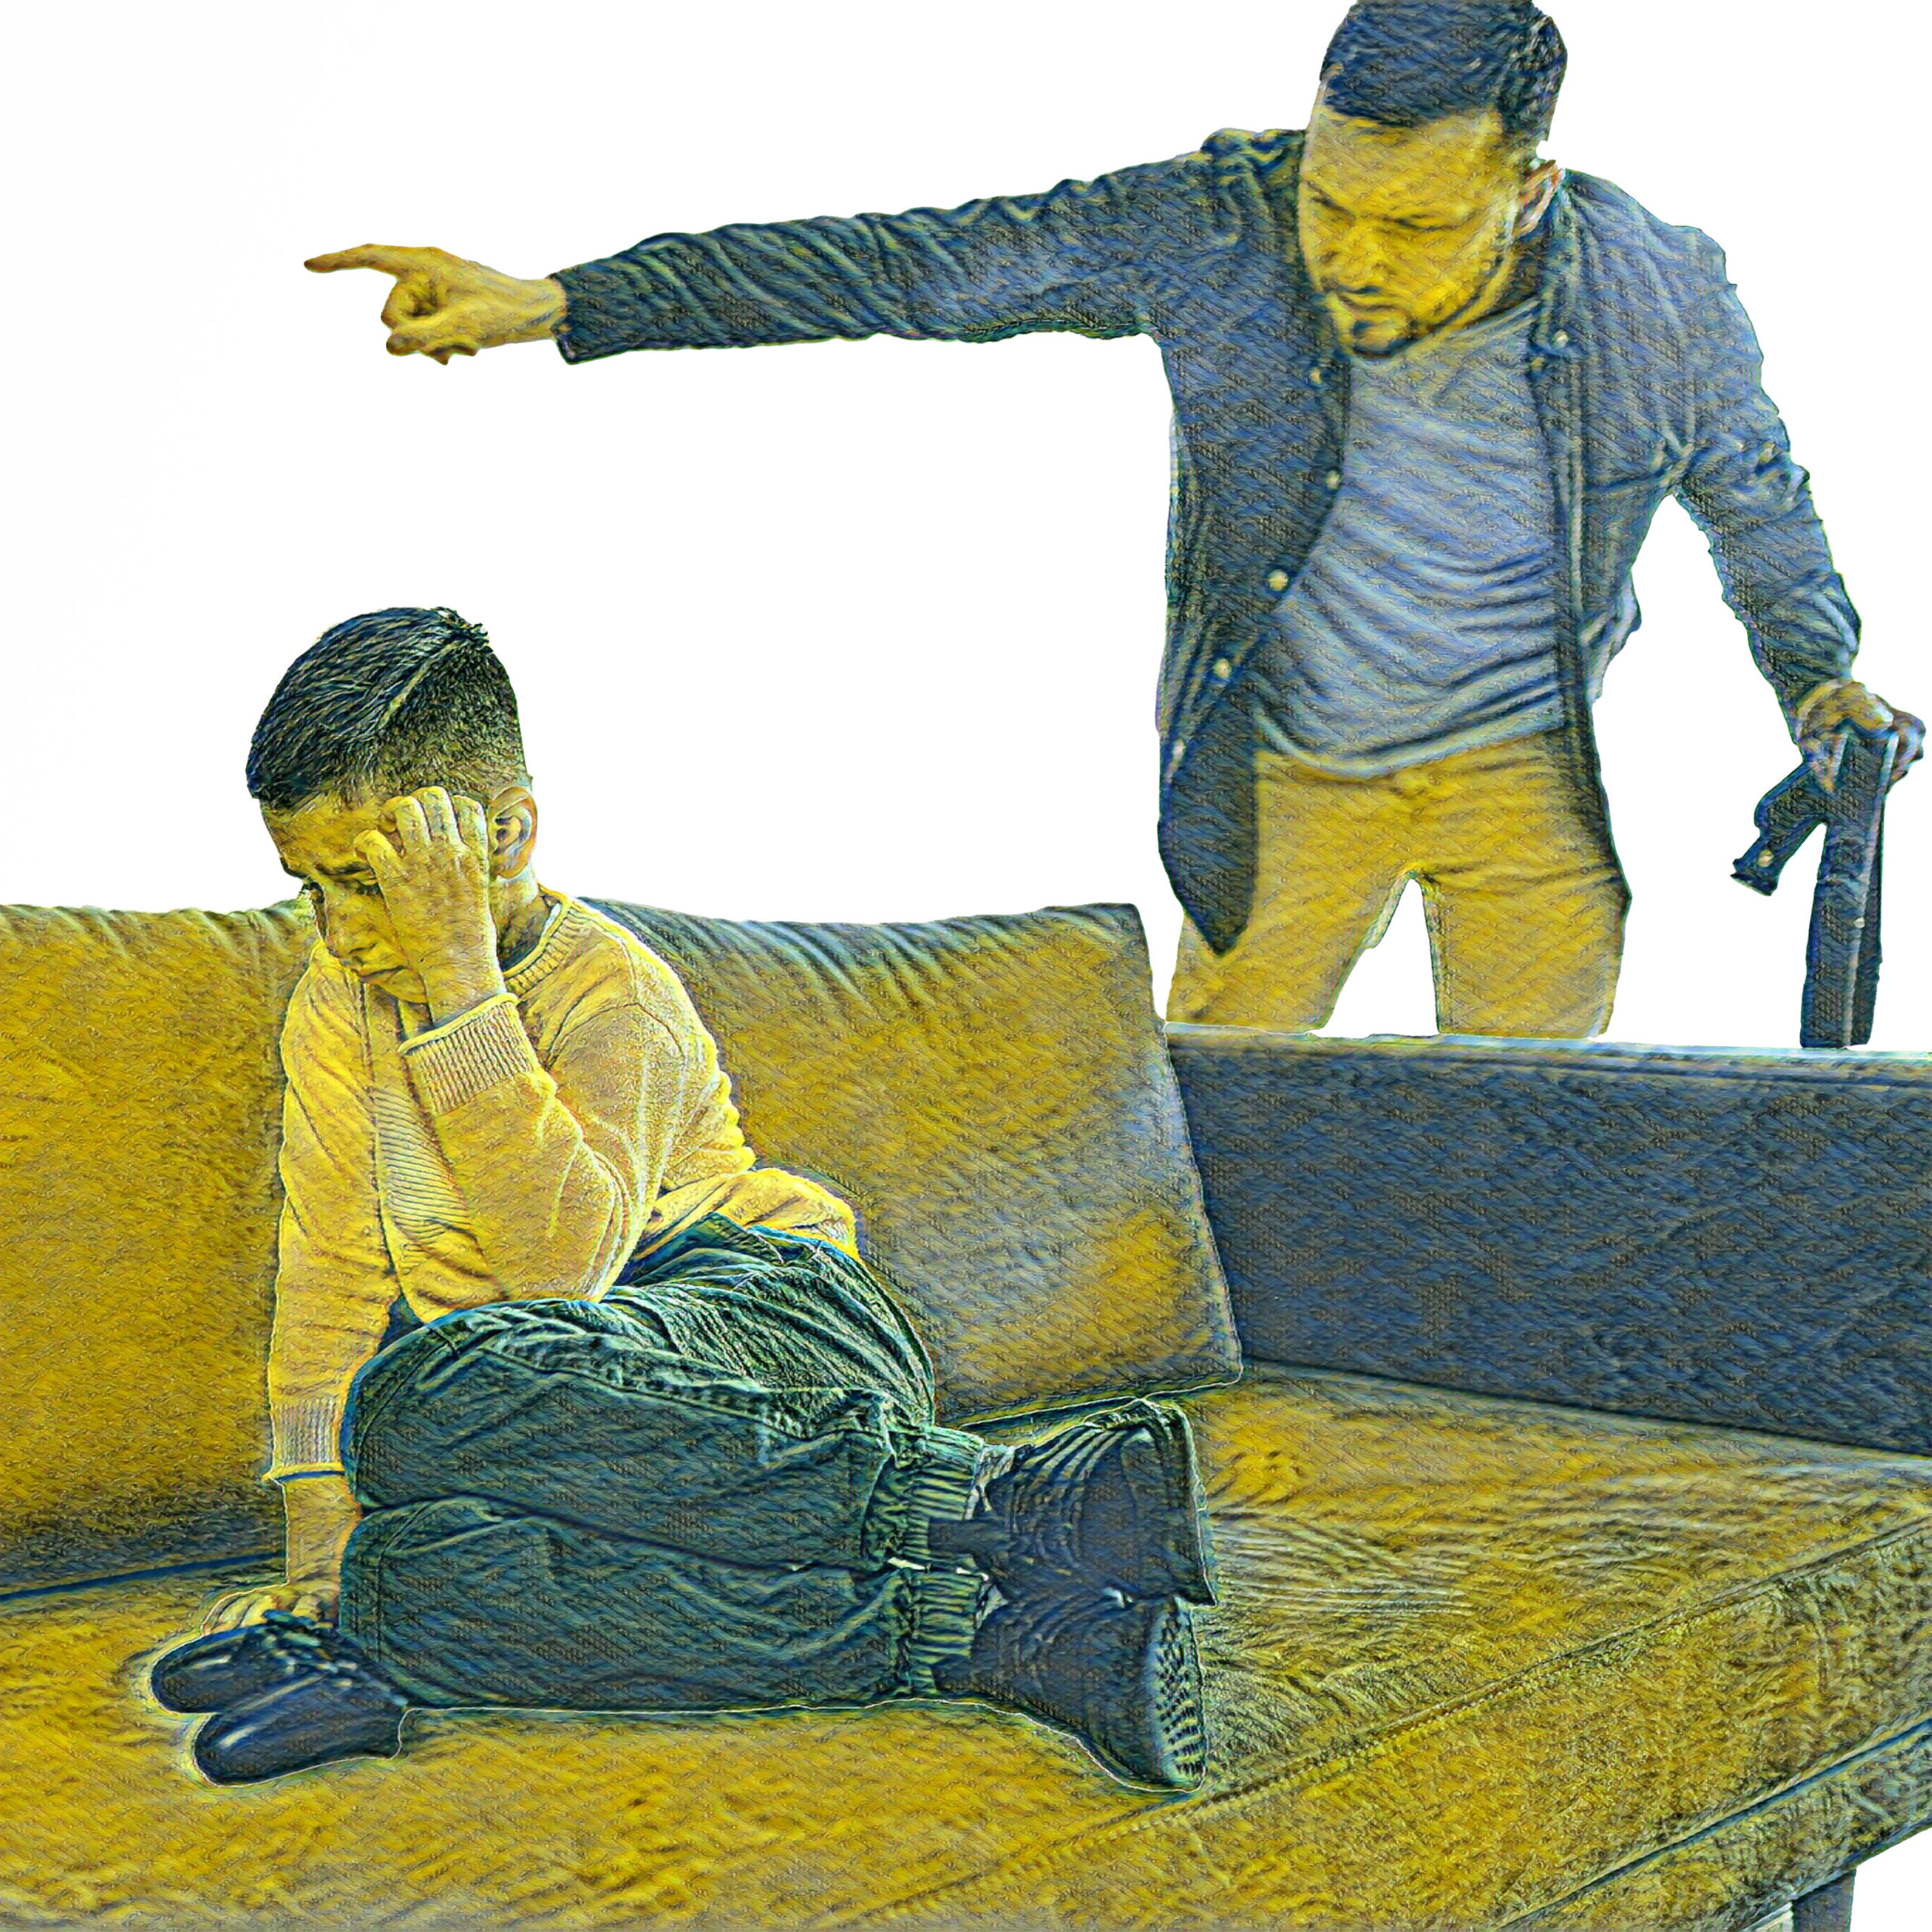 A boy is curled up on a sofa with his back to a man behind him at the end of the sofa. The man is pointing out of the room they may be in and is holding a belt with his other hand.